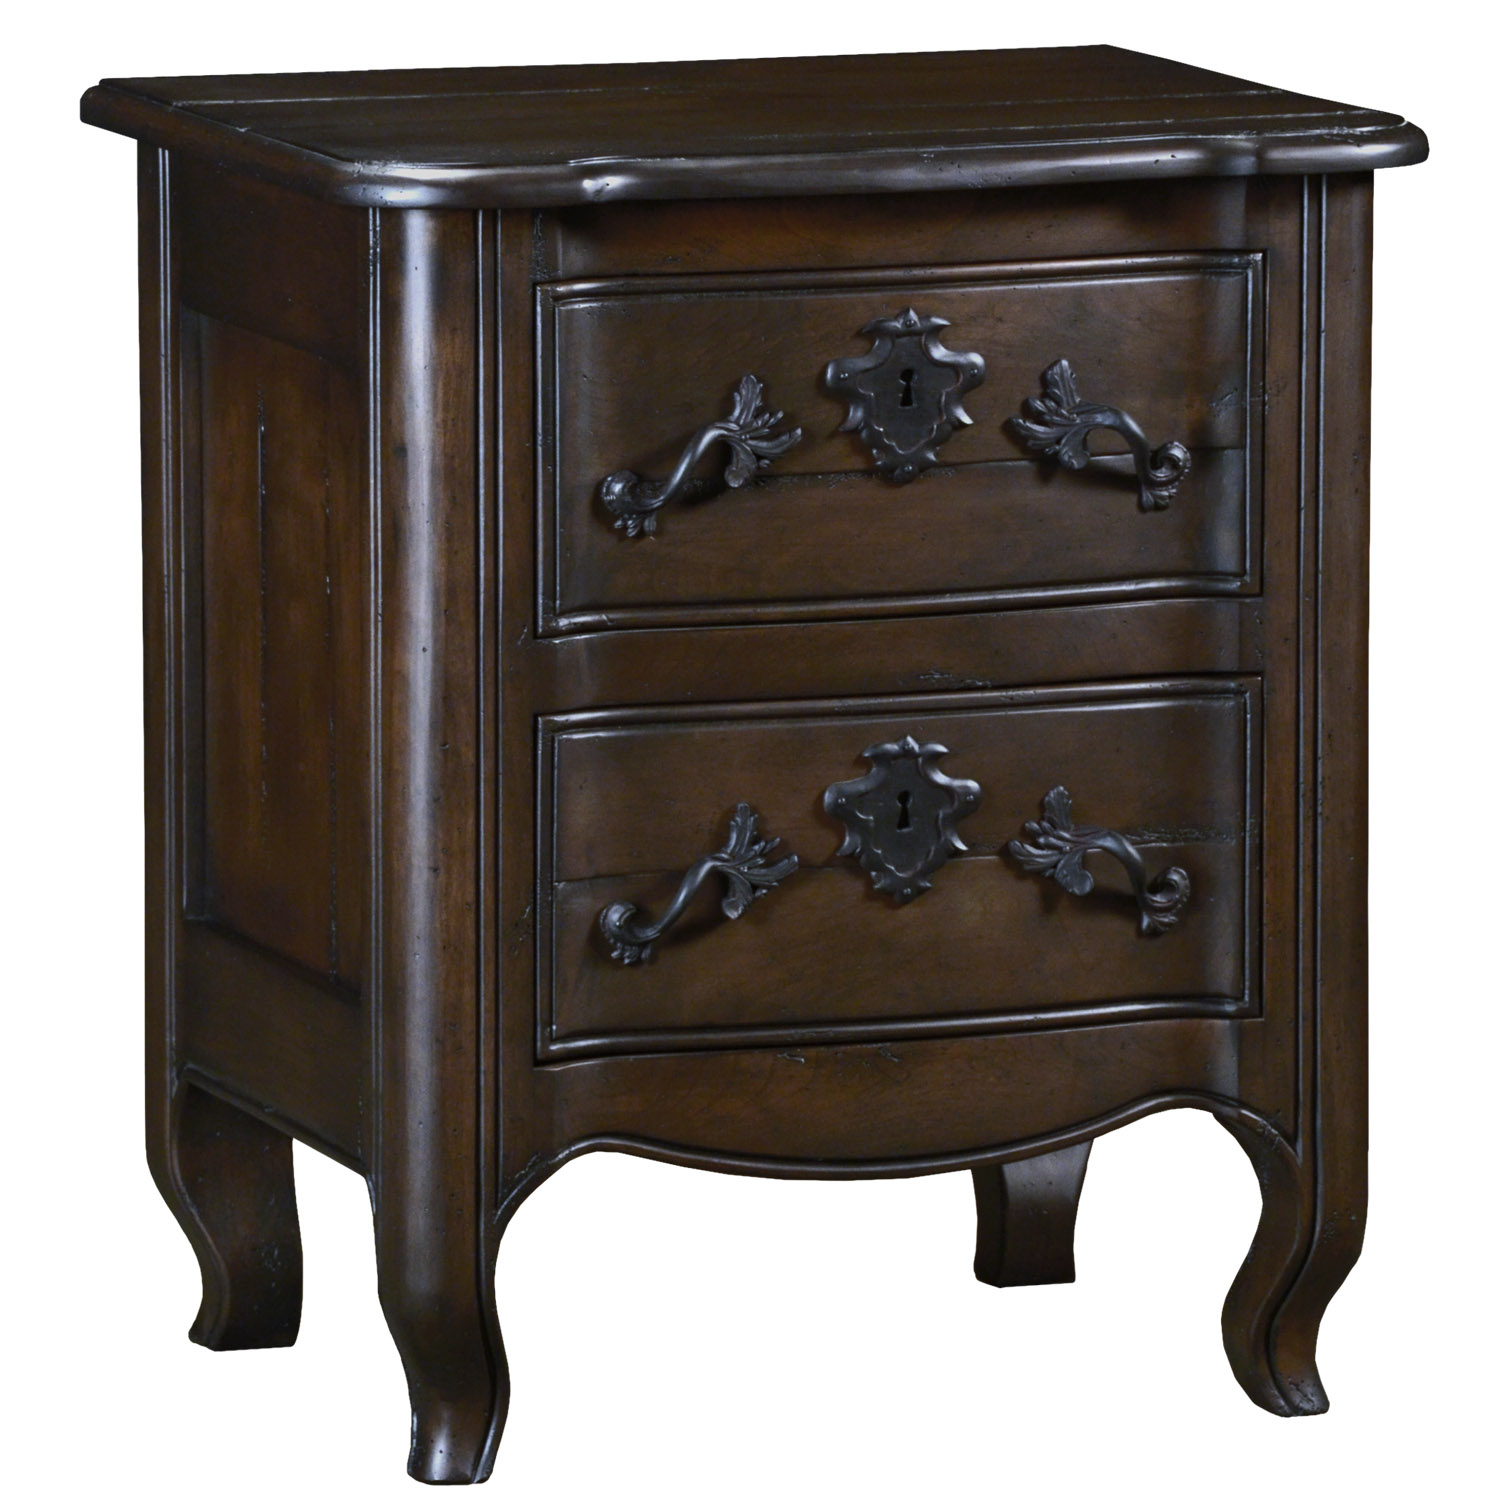 Catarina traditional transitional chest of drawers dresser by Woodland furniture in Idaho Falls